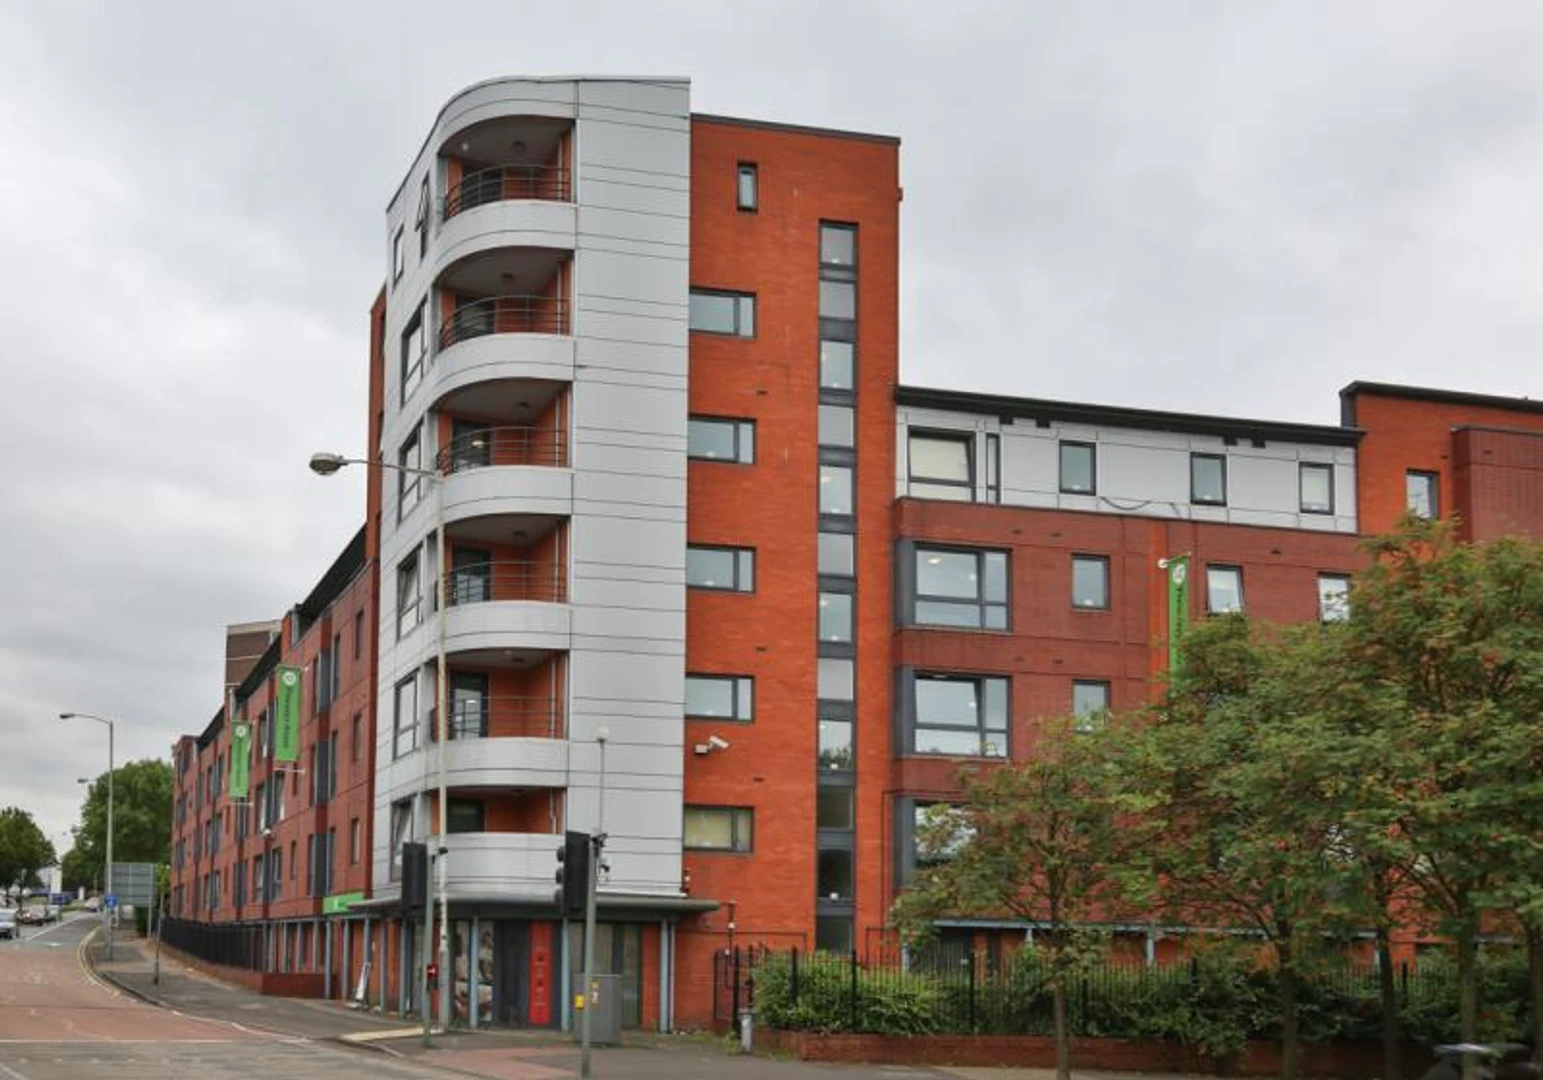 Renting rooms by the month in Wolverhampton